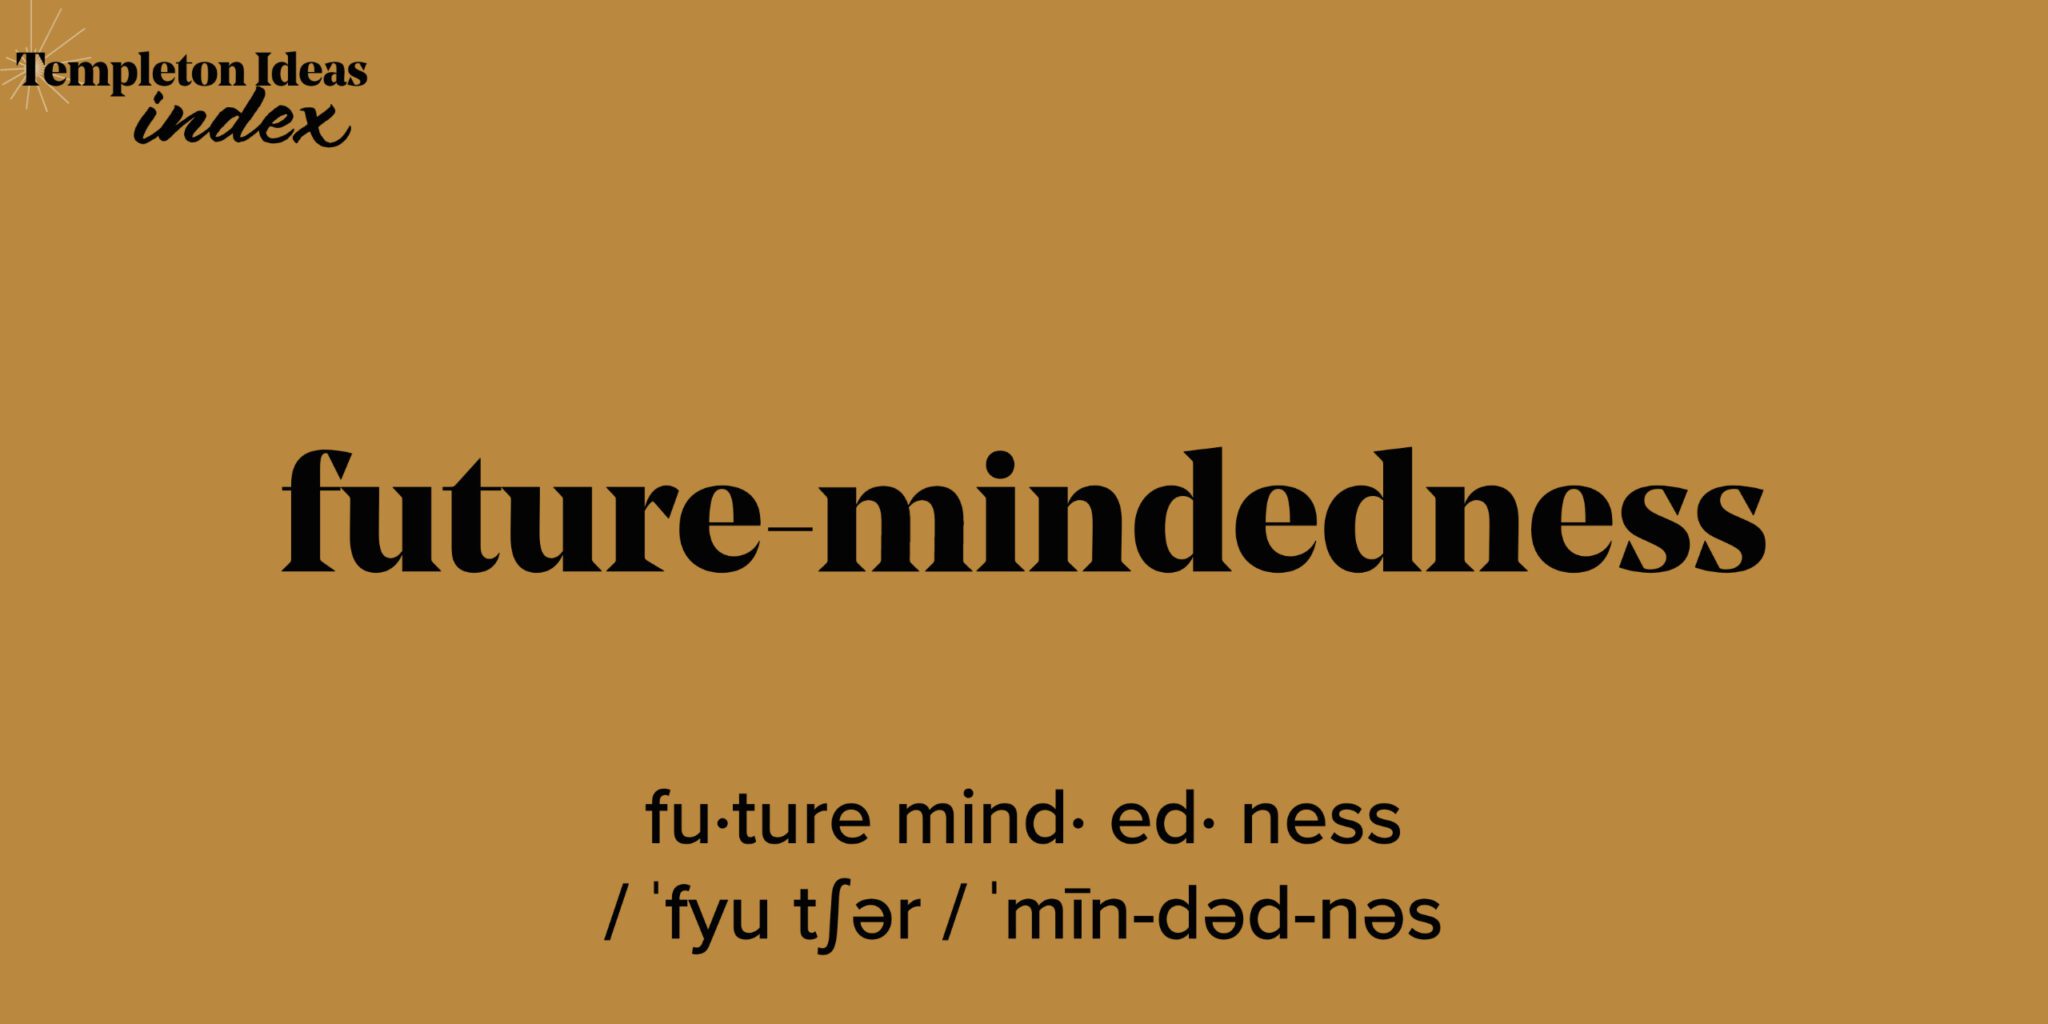 What Is Future-Mindedness?